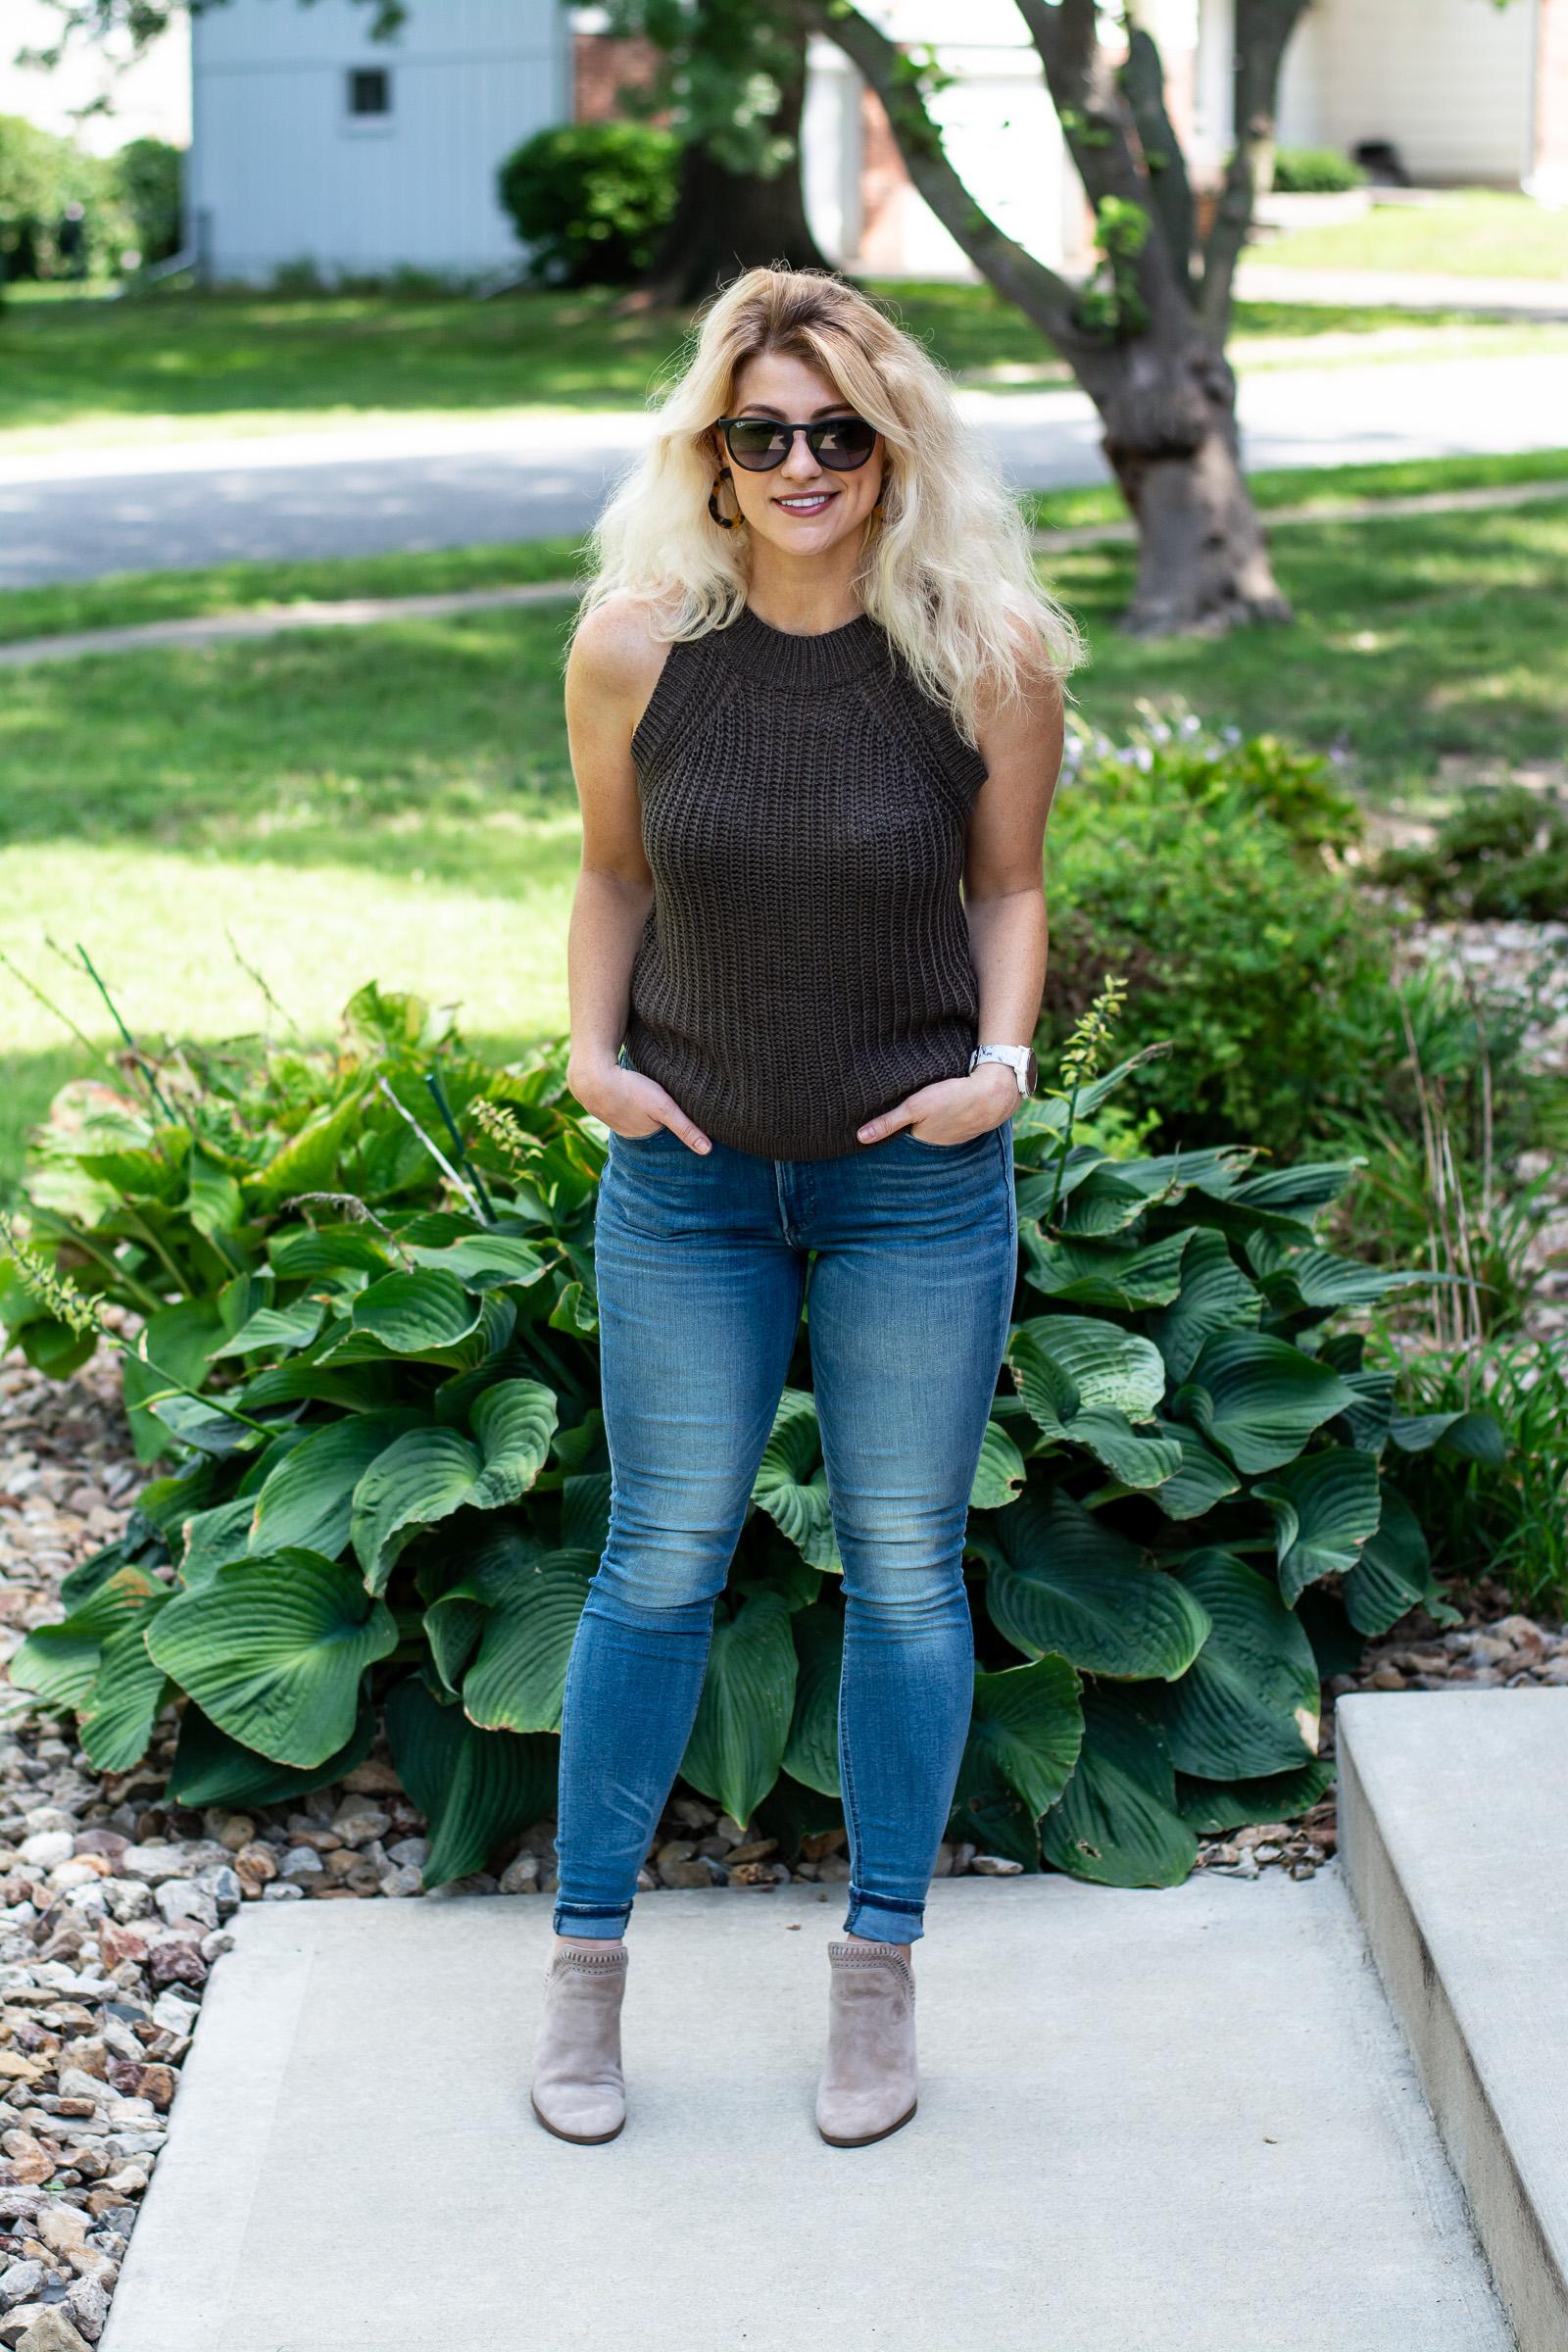 Transitional Outfit: Summer Sweater + Ankle Boots. | Le Stylo Rouge